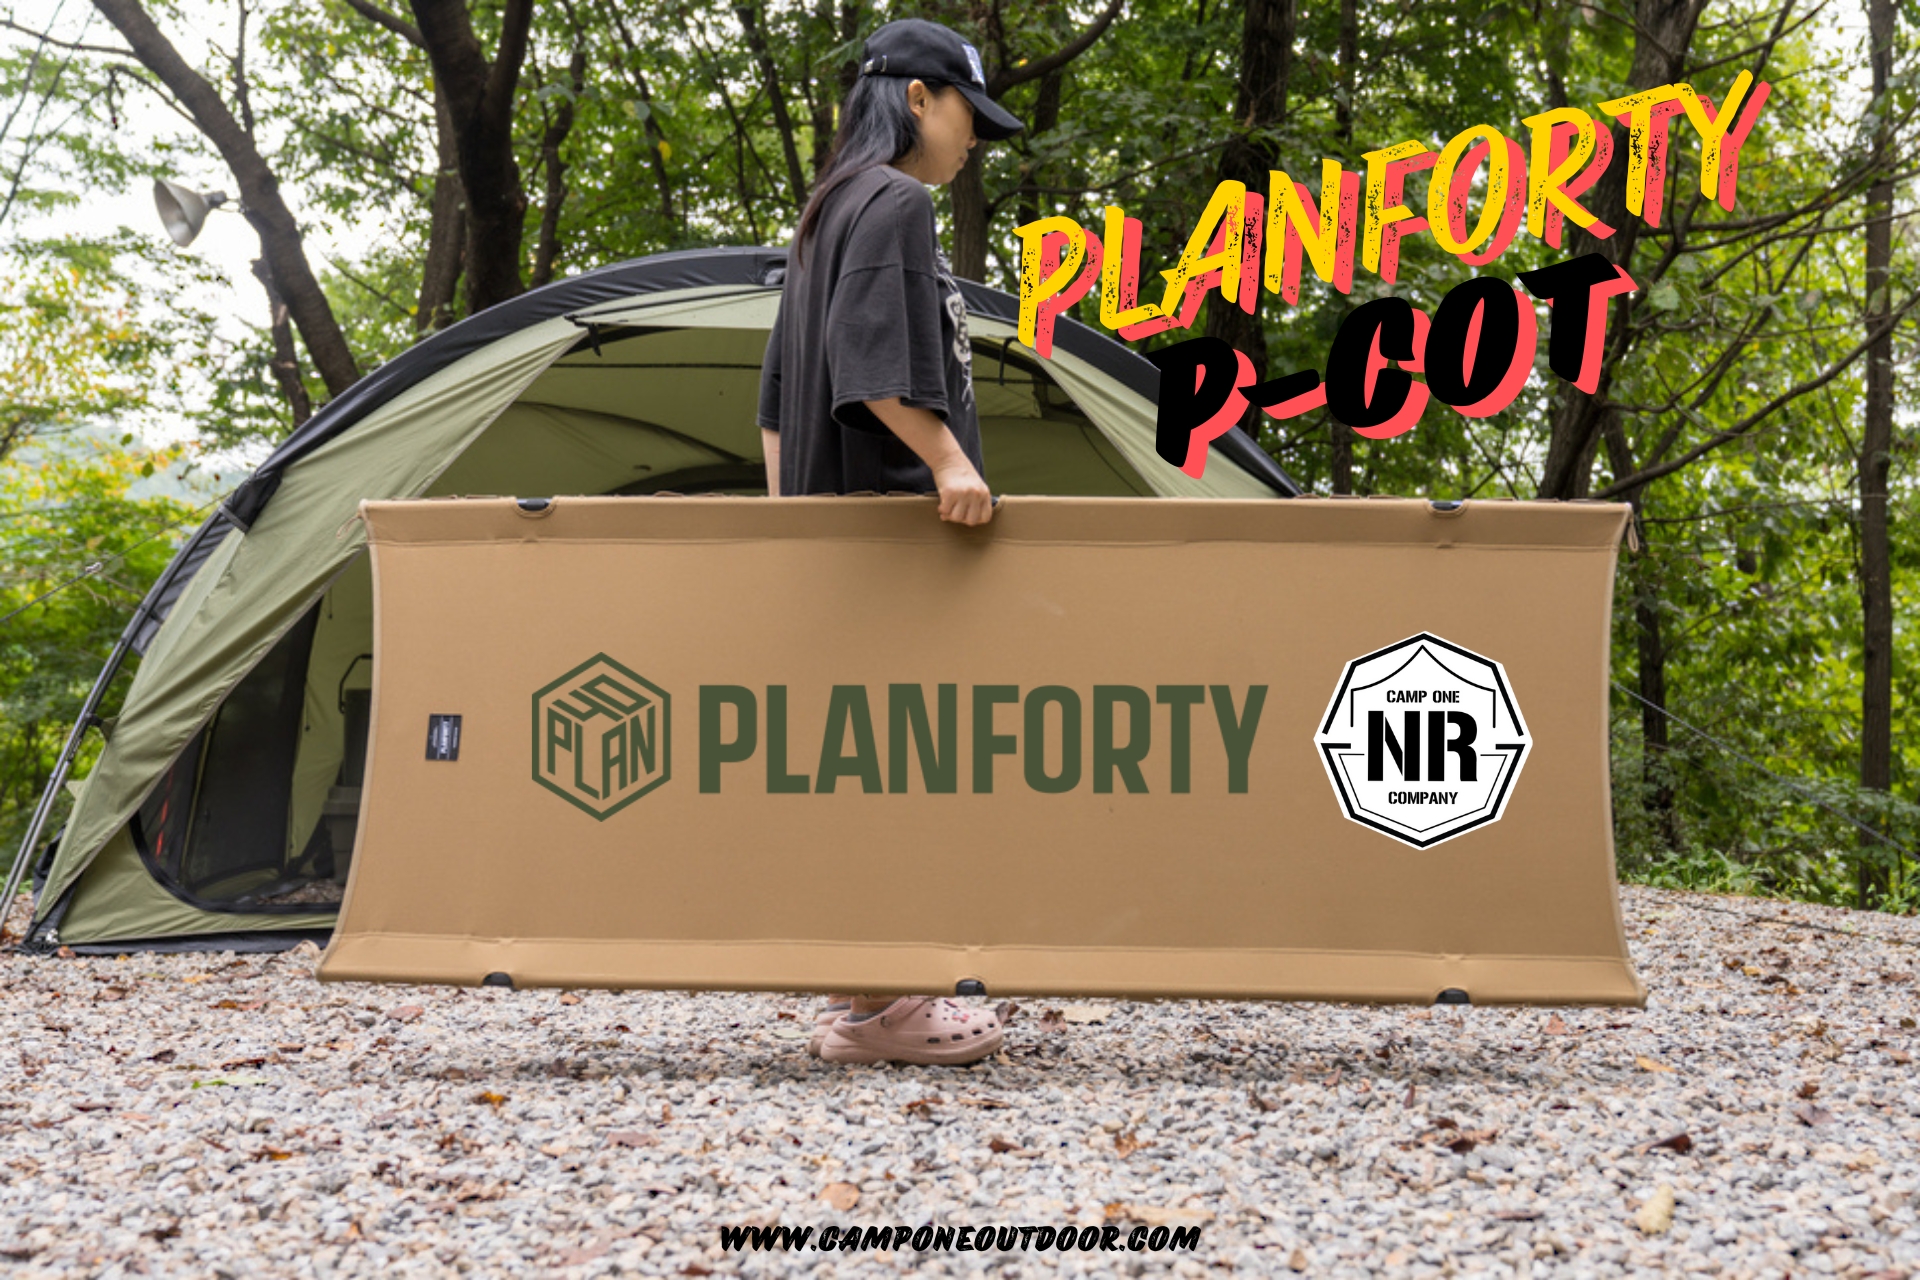 Planforty P-COT Wider is better